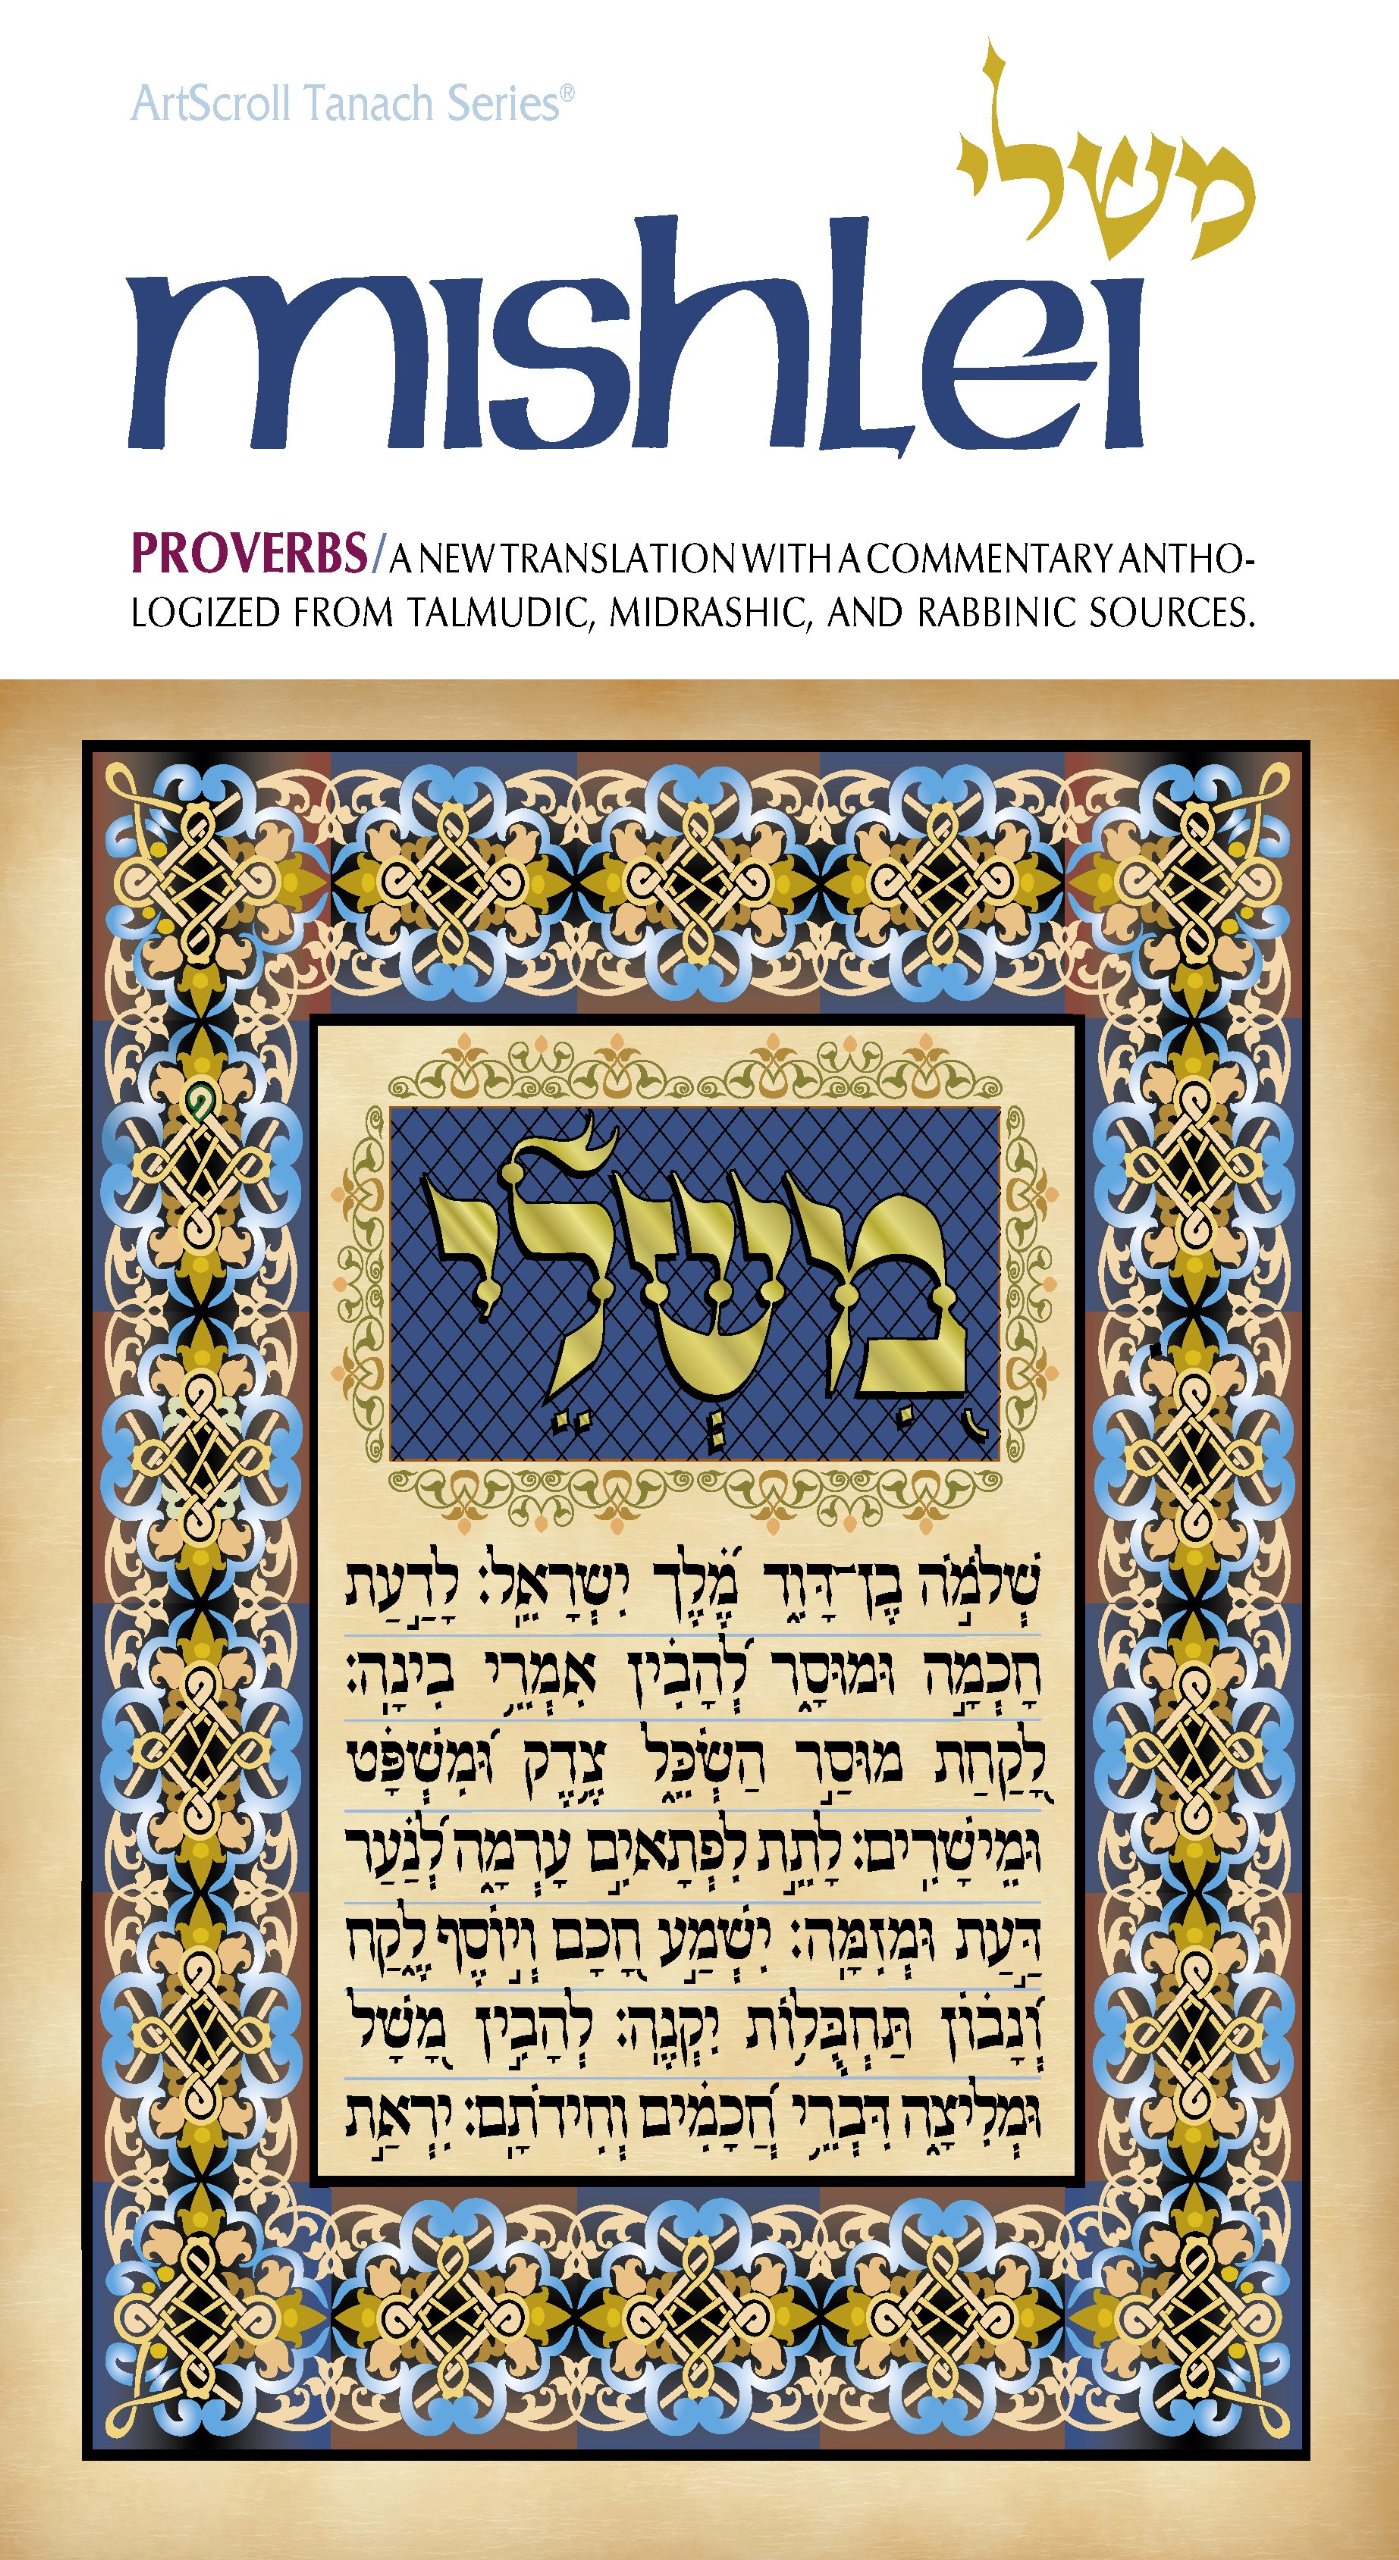 Mishlei proverbs vol.1: a new translation with a commentary anthologized from Talmudic, midrashic and rabbinic sources